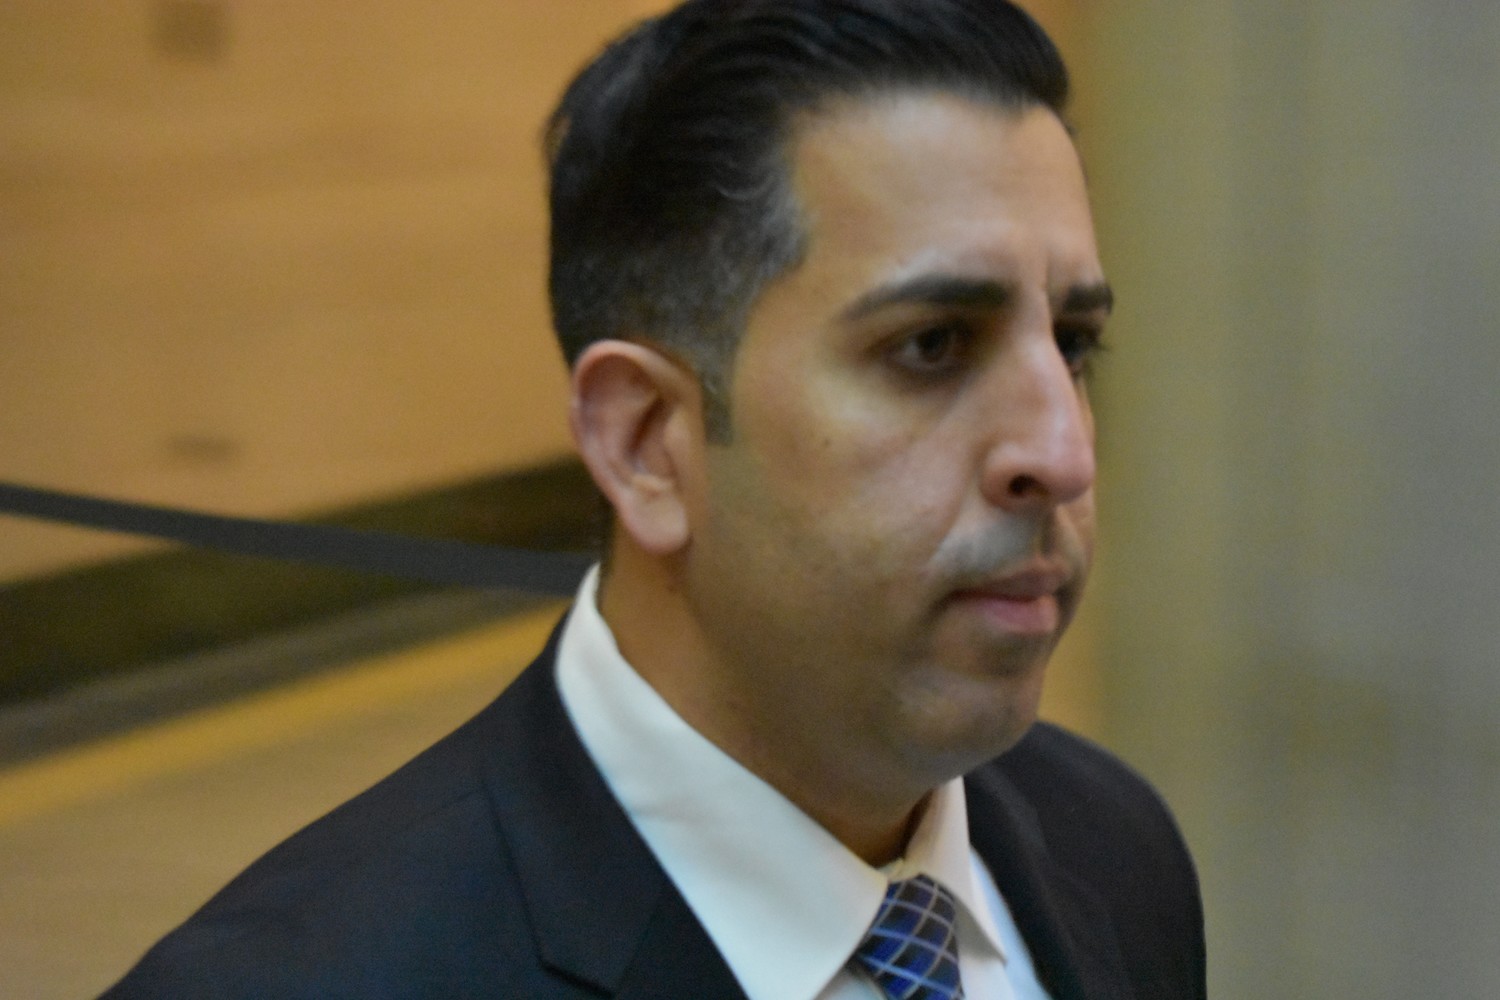 Rockville Centre Police Officer Anthony Federico exited the courtroom at the Nassau County Courthouse in Mineola on Jan. 24 after the first day of his trial.